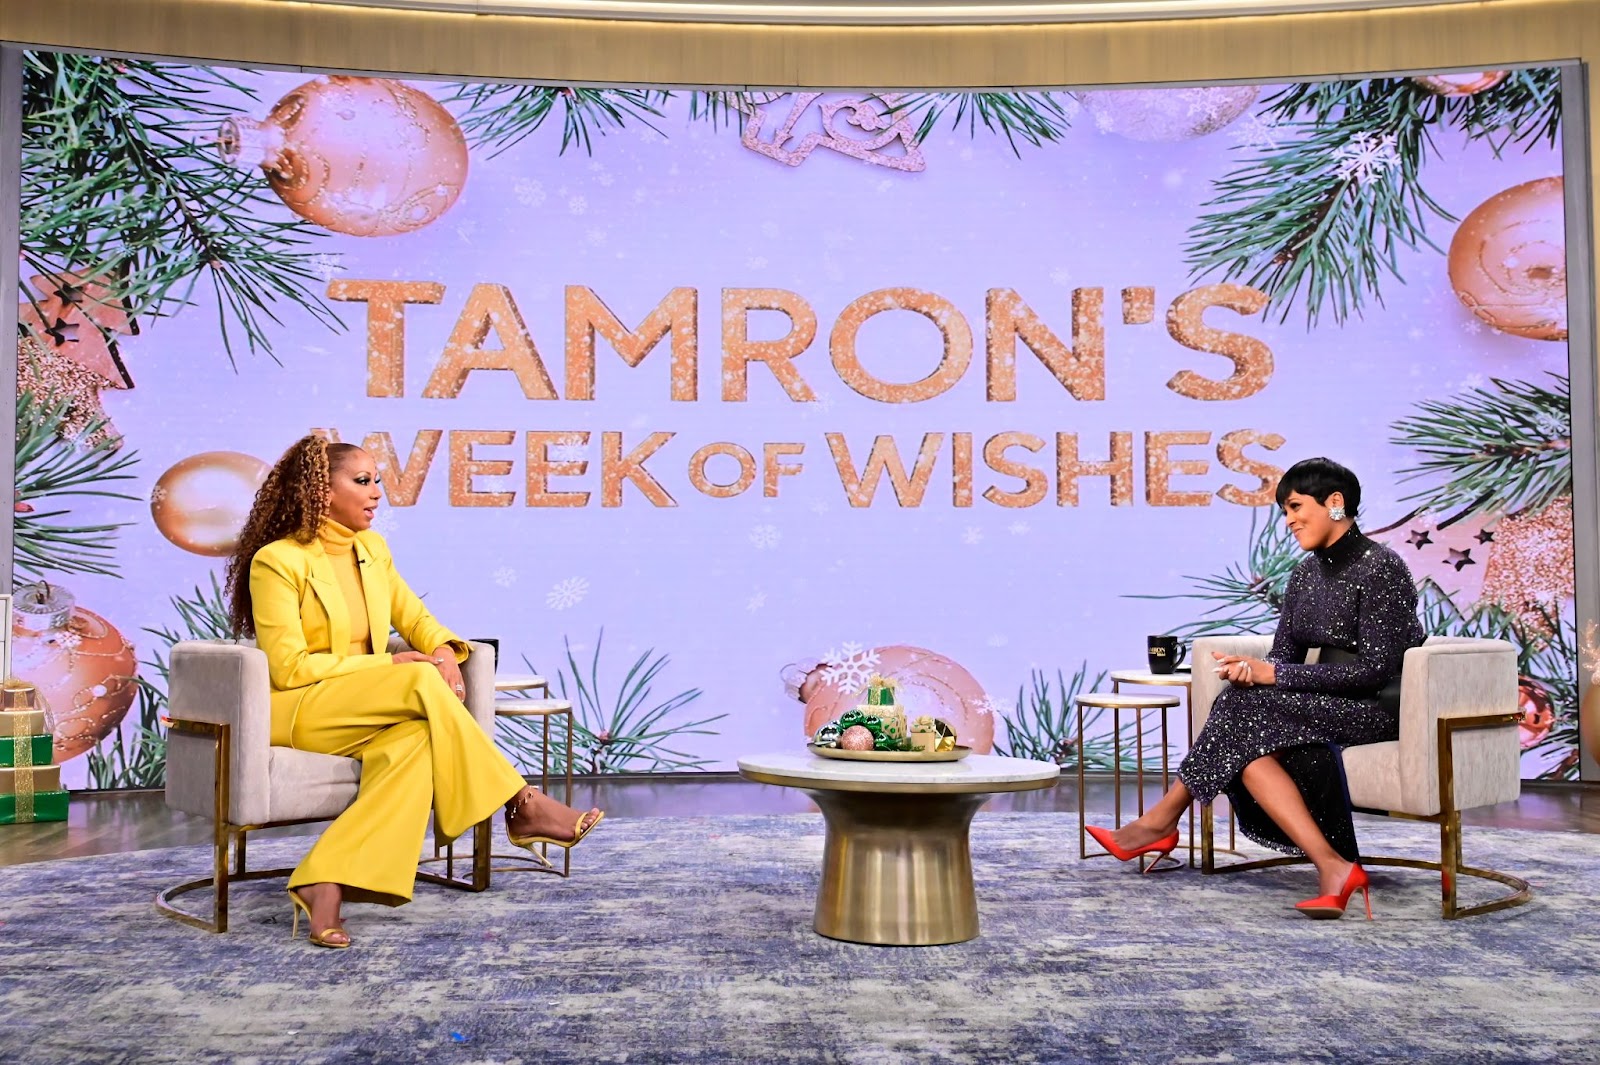 Holly Robinson Peete Discusses Her New Christmas Movie On ‘Tamron Hall’